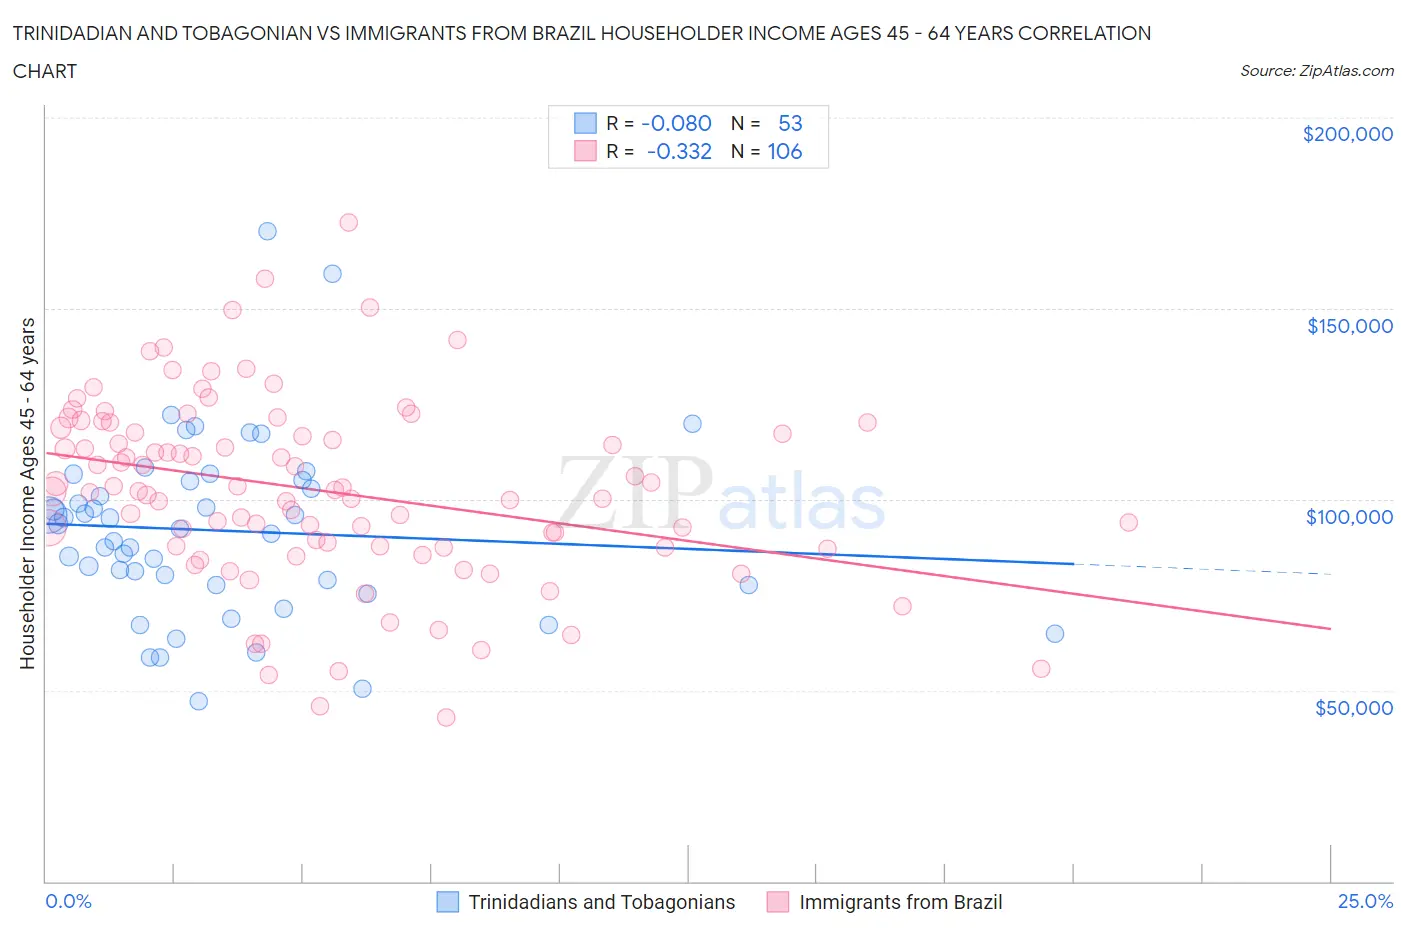 Trinidadian and Tobagonian vs Immigrants from Brazil Householder Income Ages 45 - 64 years